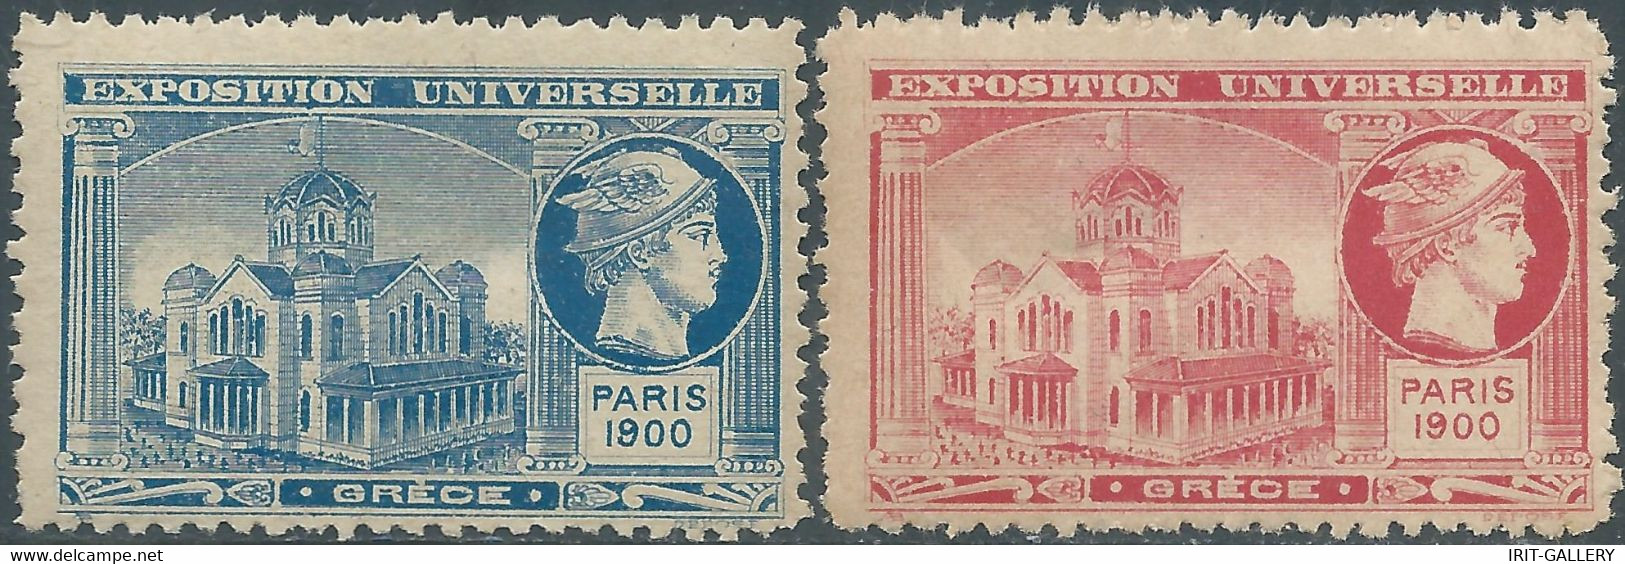 France,Paris 1900 UNIVERSAL EXHIBITION OF Greece ,Trace Of Hinged - 1900 – Pariis (France)